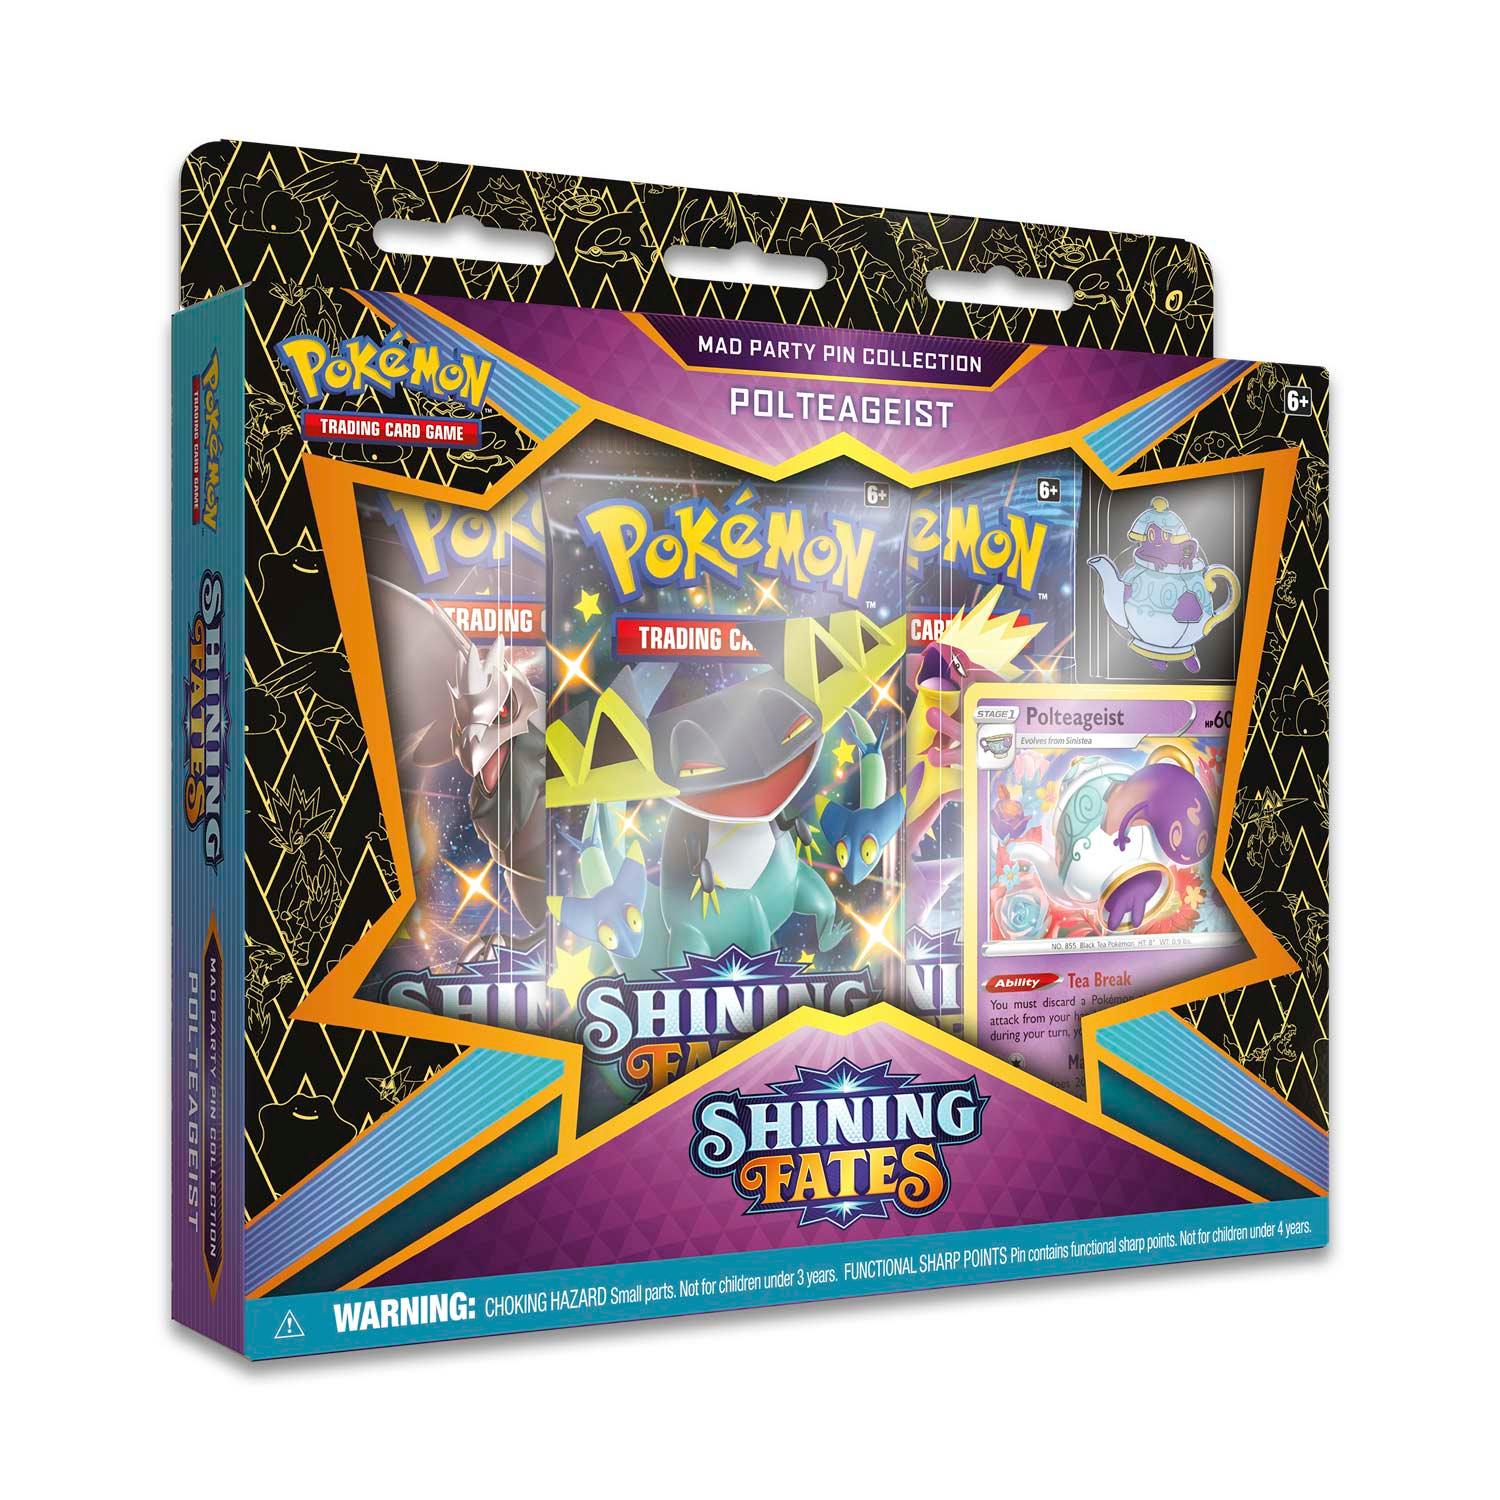 Pokemon Box - Mad Party Pin Collection - Shining Fates - Polteageist Pin - Hobby Champion Inc